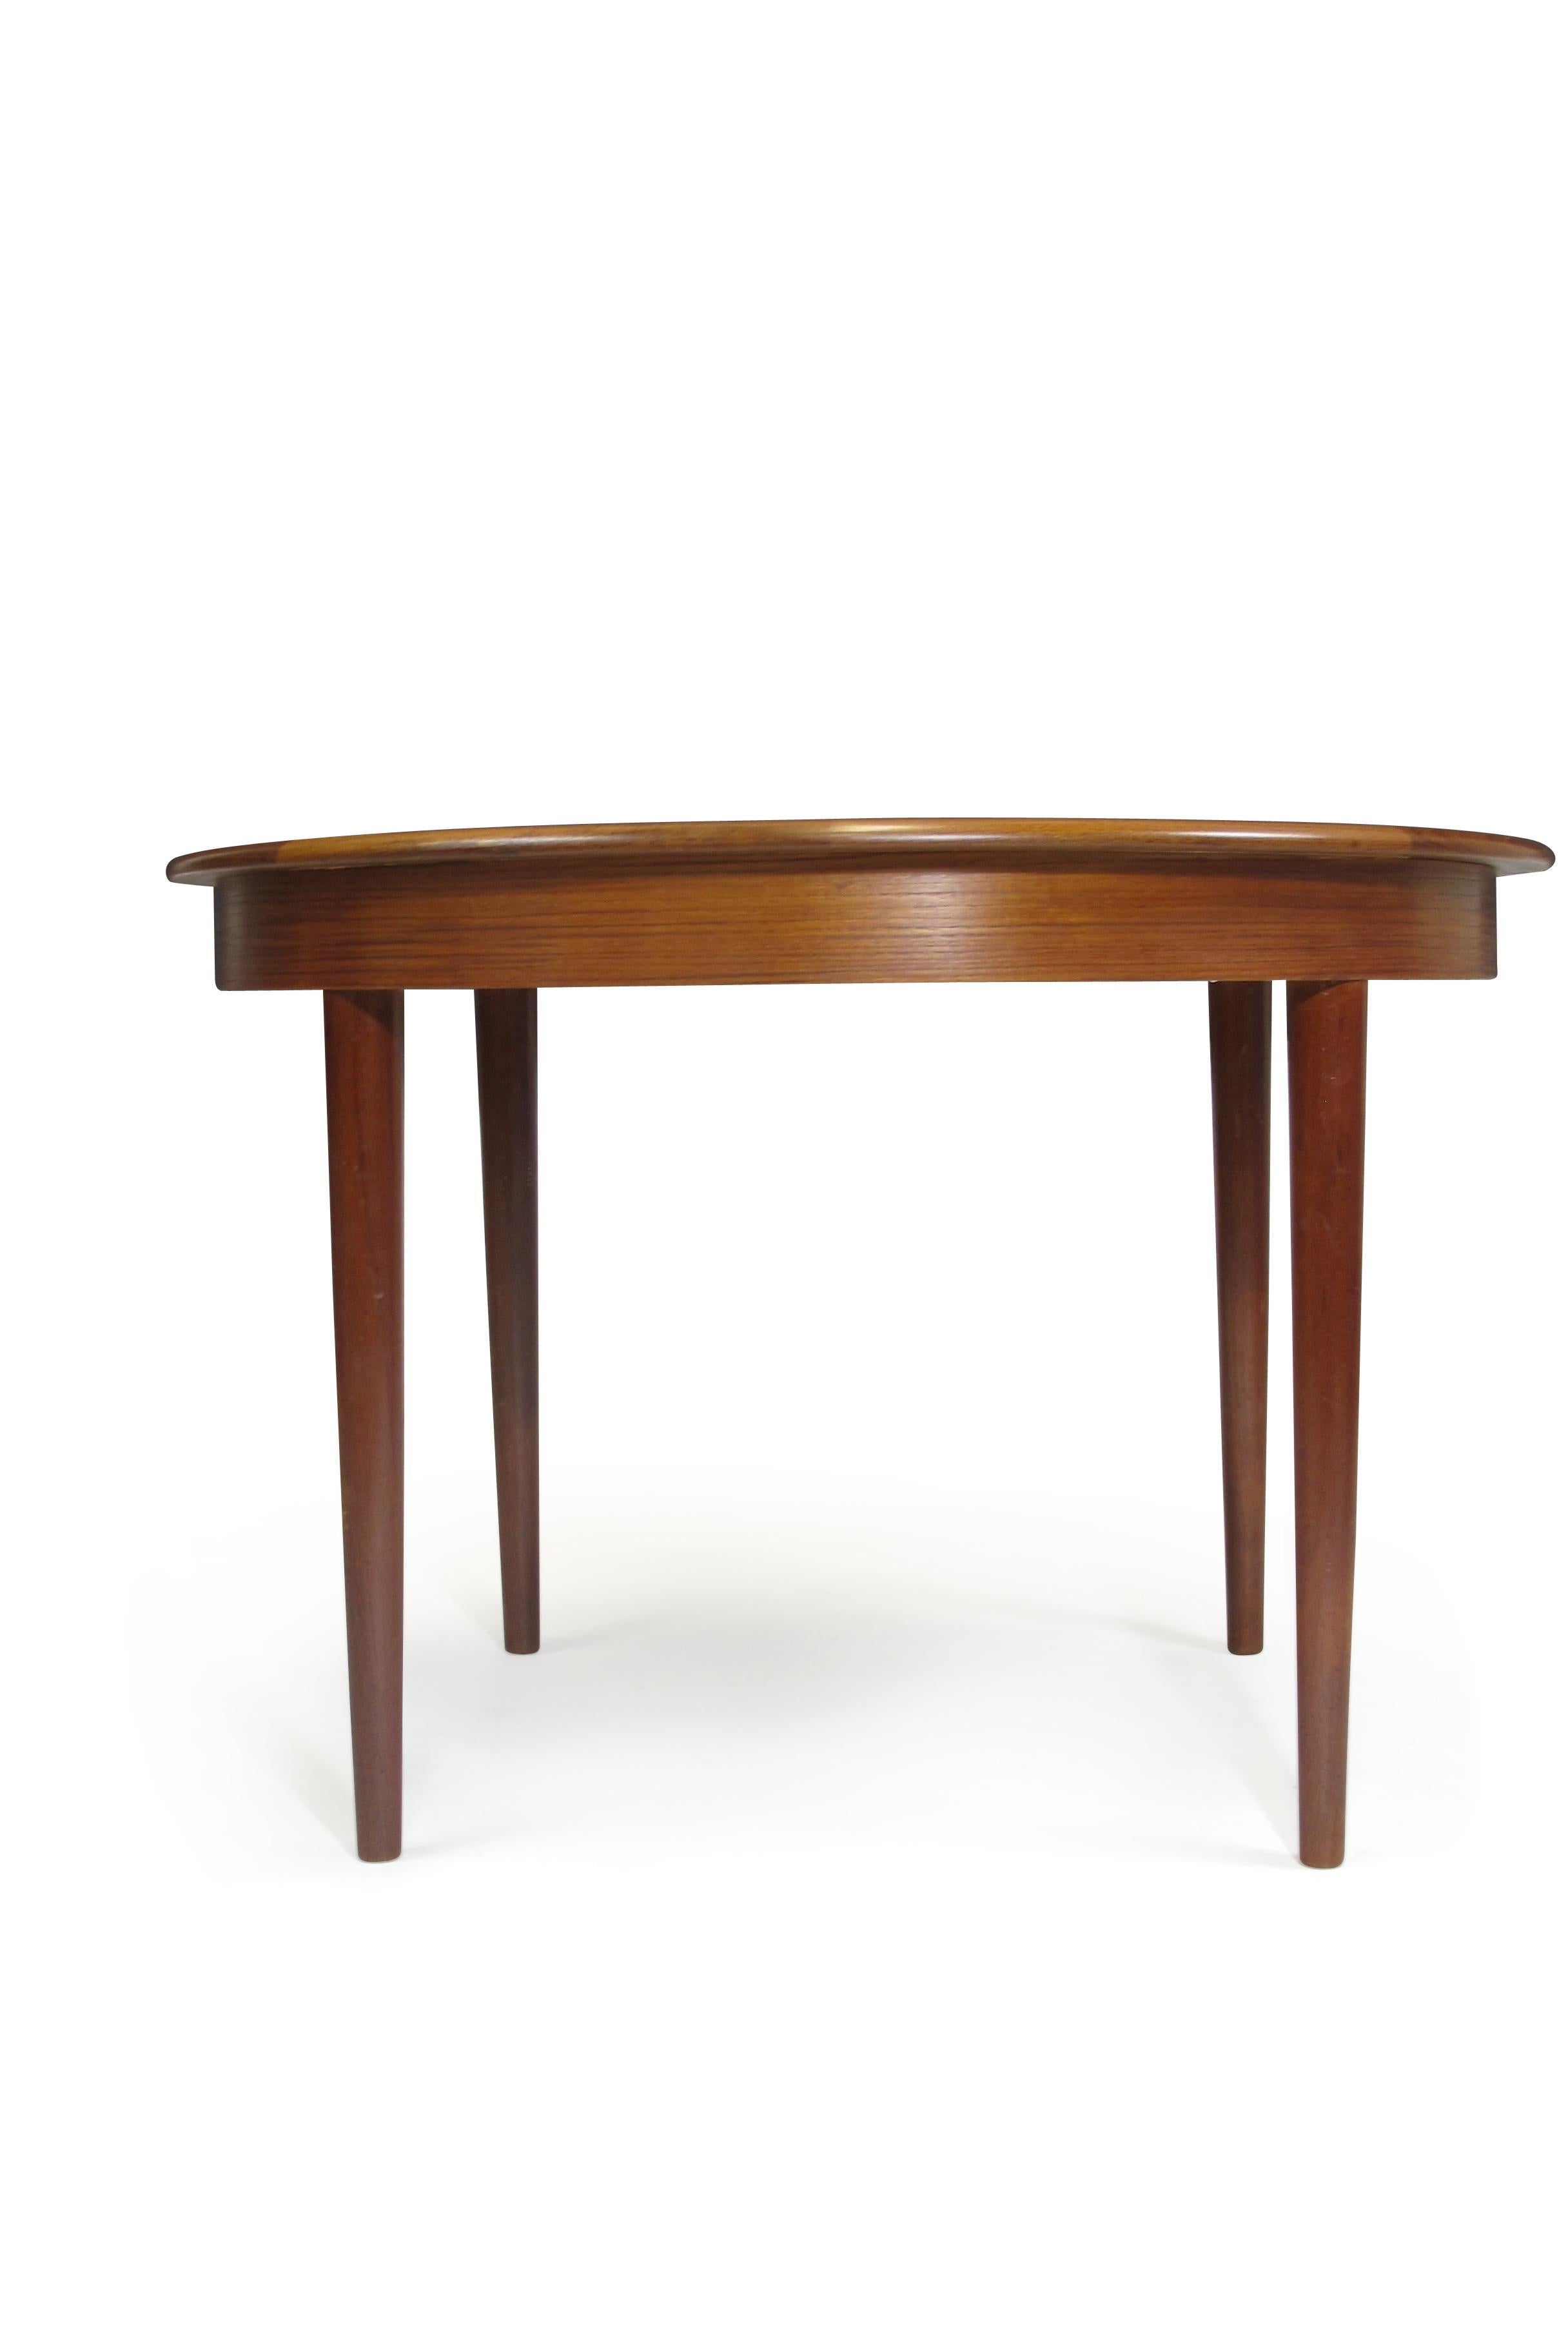 Round dining table with octagonal edge banding detail and three leaves. Crafted of old-growth teak arranged for bookmatched grain. Table seats 4 closed and 10 fully expanded. Finely restored by hand with natural oils. Measurements: Round - 43.25